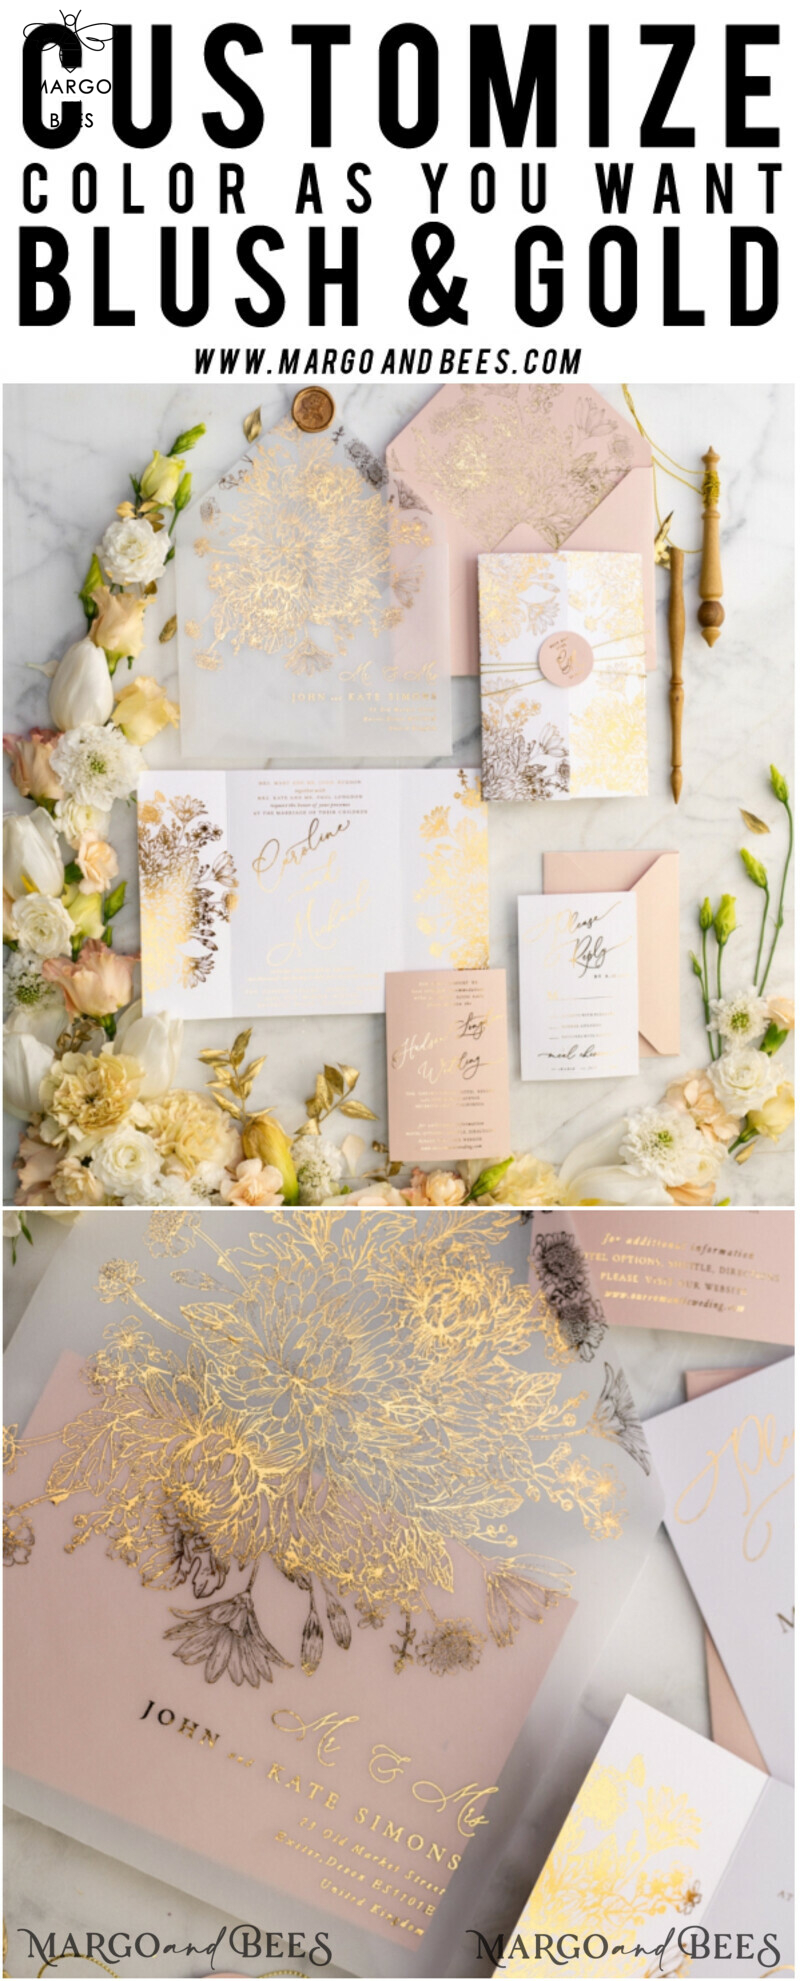 Exquisite Arabic Golden Wedding Invitations with Glamour Gold Foil for a Romantic Blush Pink Affair: Bespoke Indian Wedding Stationery-46